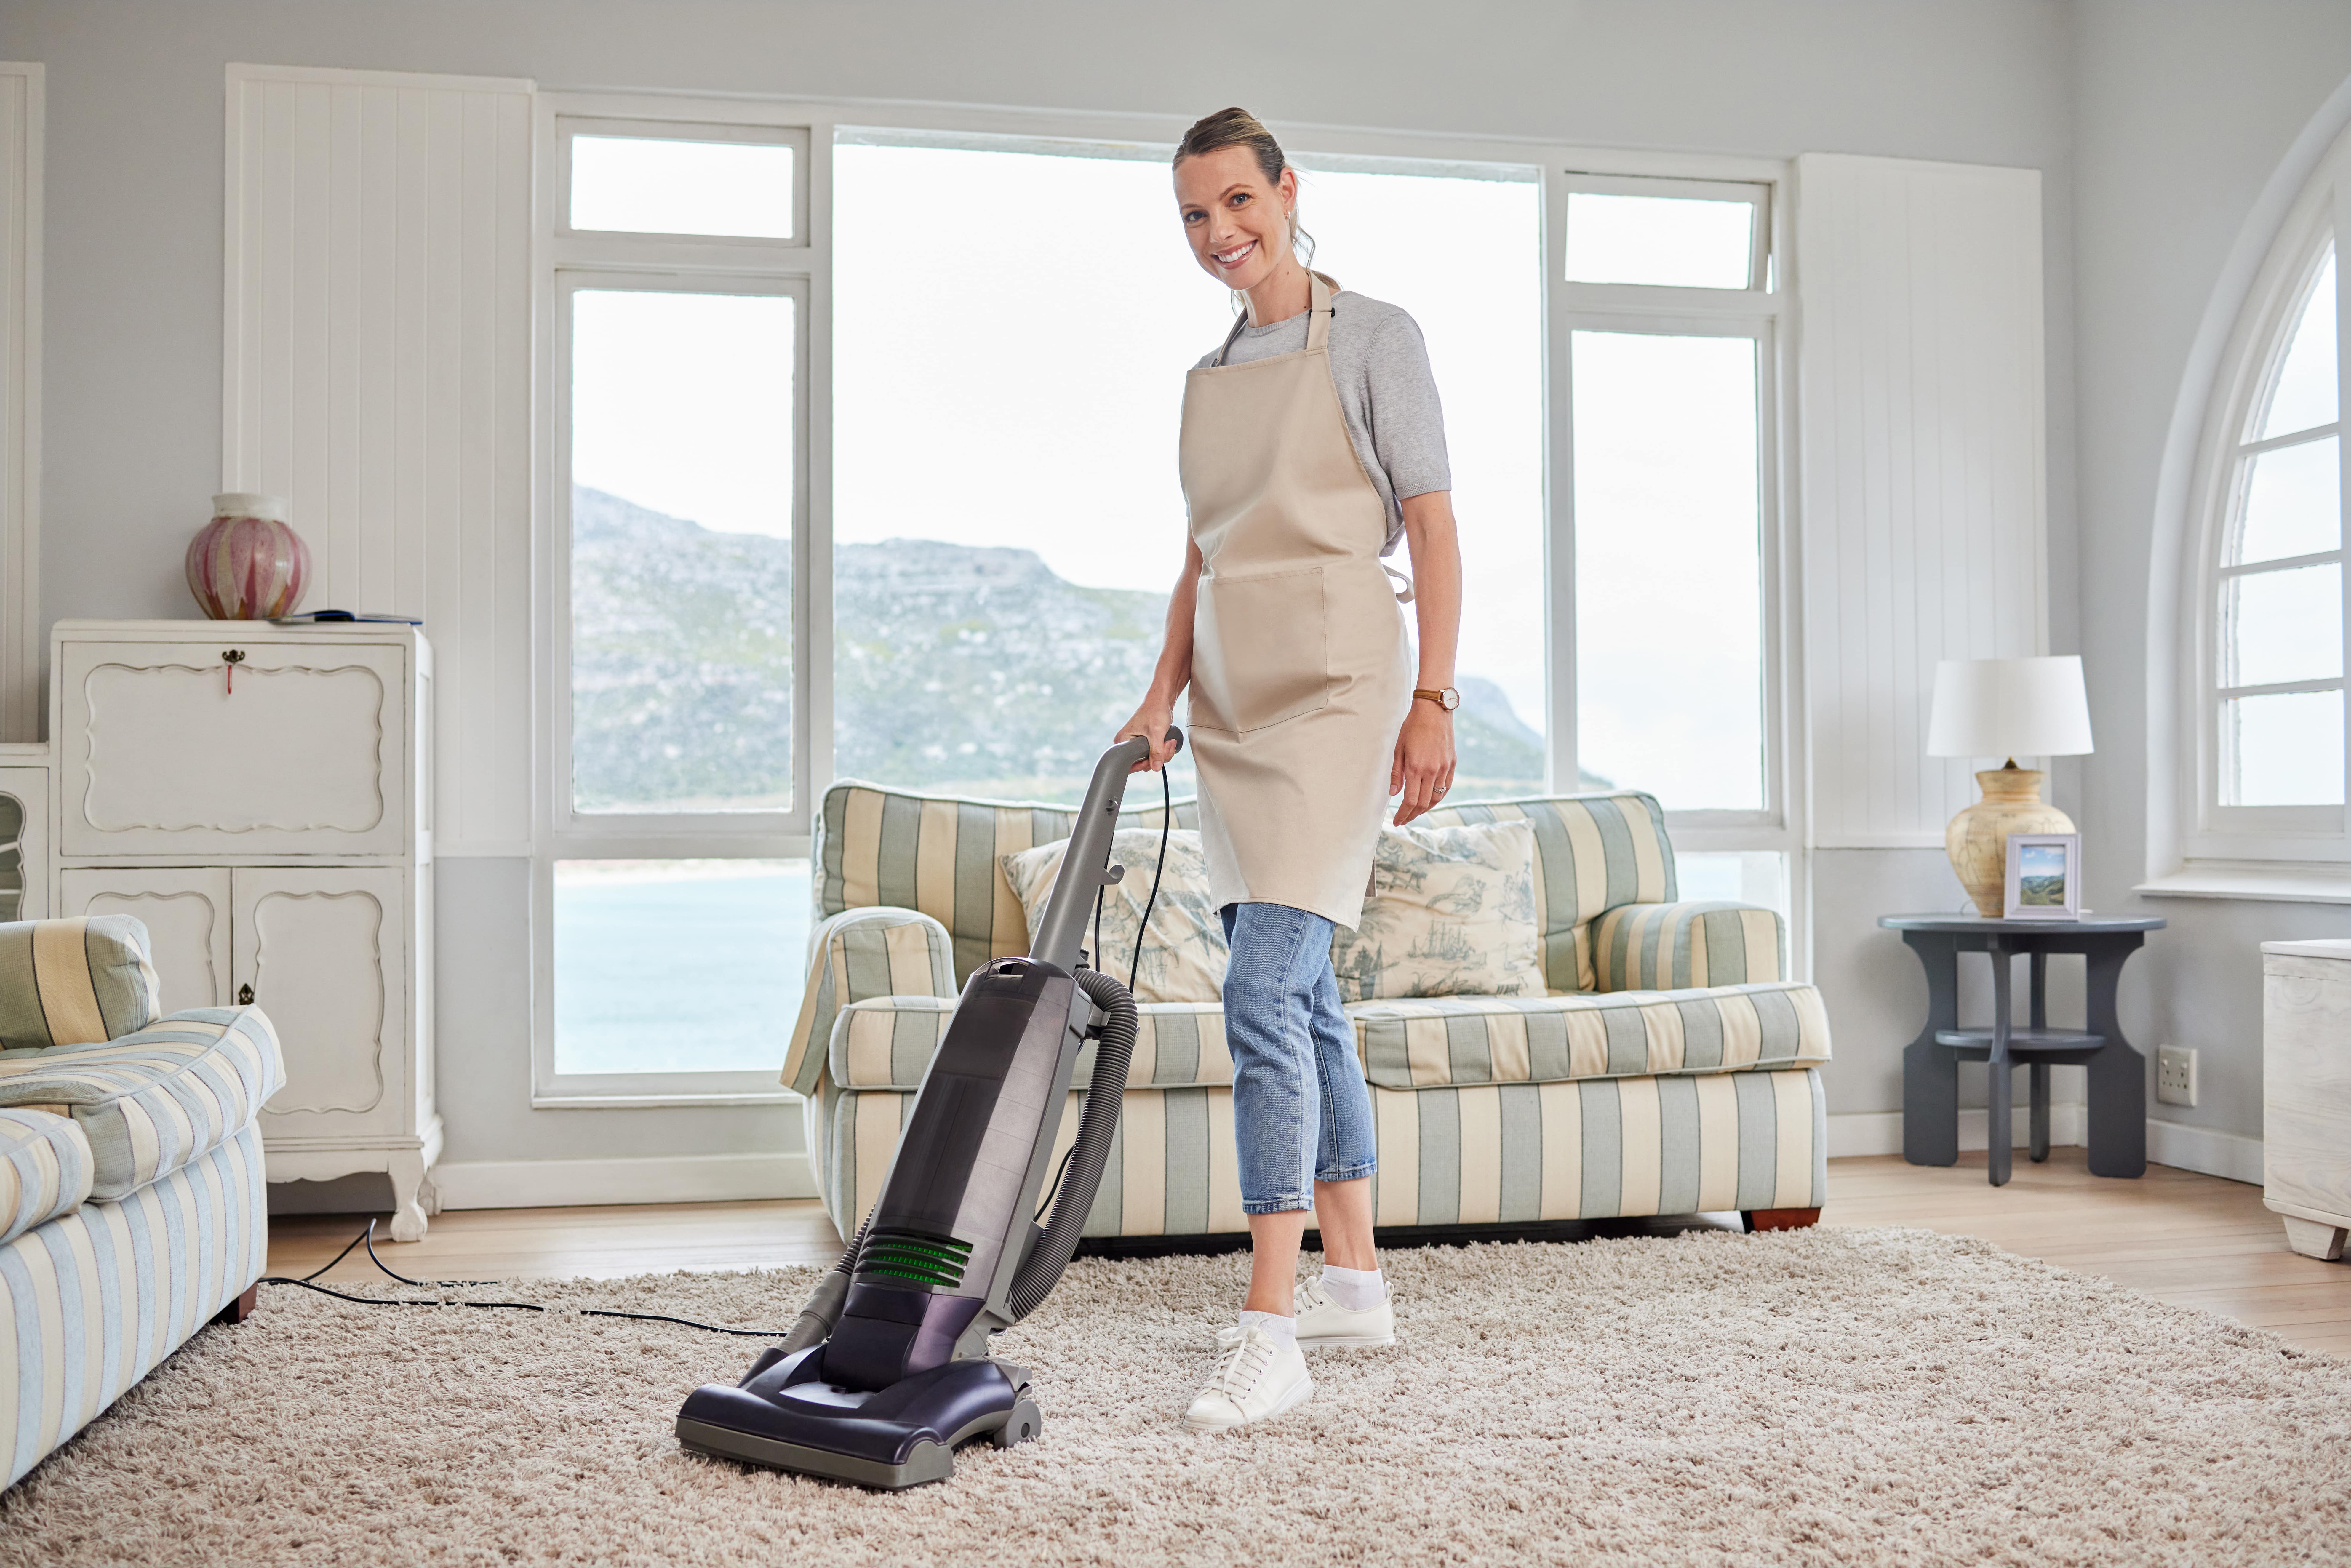 portrait-of-a-young-woman-vacuuming-a-carpet-in-th-min